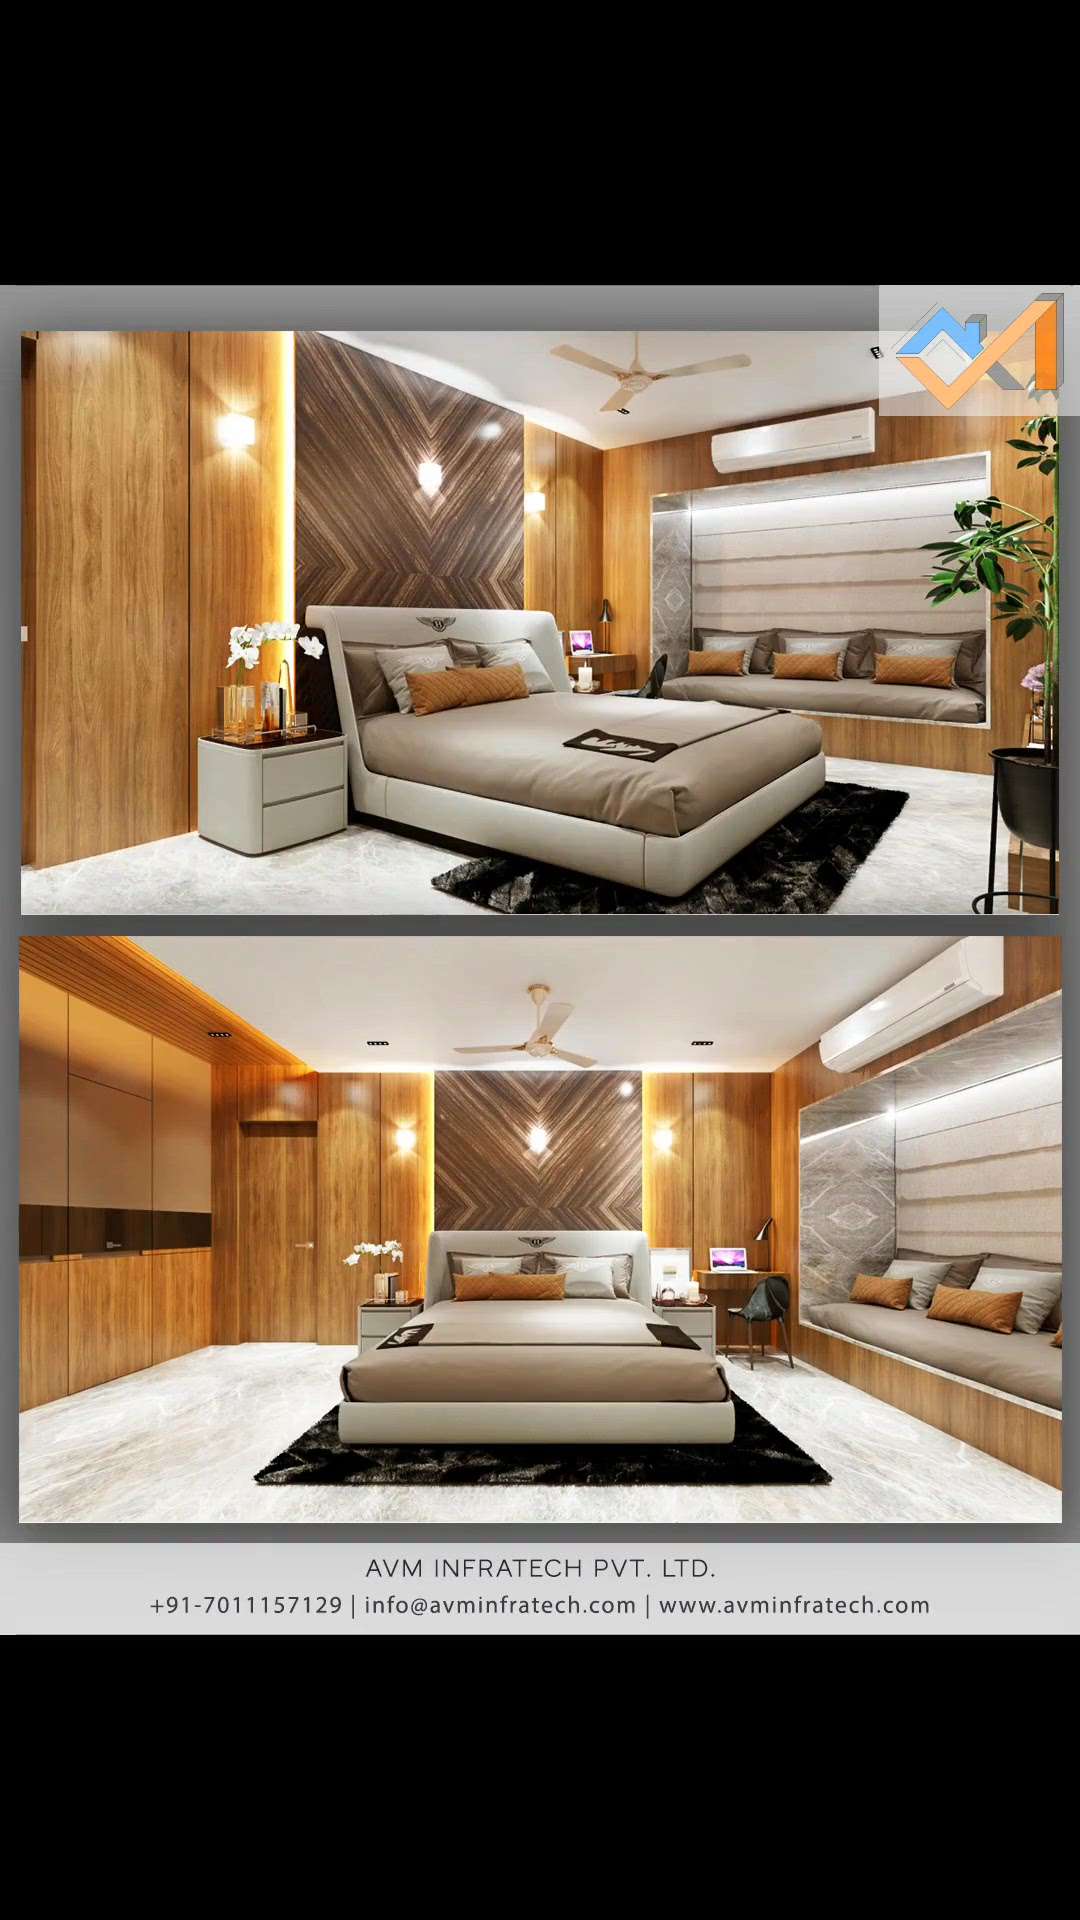 Looking for revamping your master bedroom? Check this out!


Follow us for more such amazing updates. 
.
.
#revamp #revamping #renovate #renovation #rénovation #renovationproject #renovationideas #3d #3dprinting #3dart #3dmodeling #3dmodel #3drender #render #avminfratech #design #interiordesign #homedesign